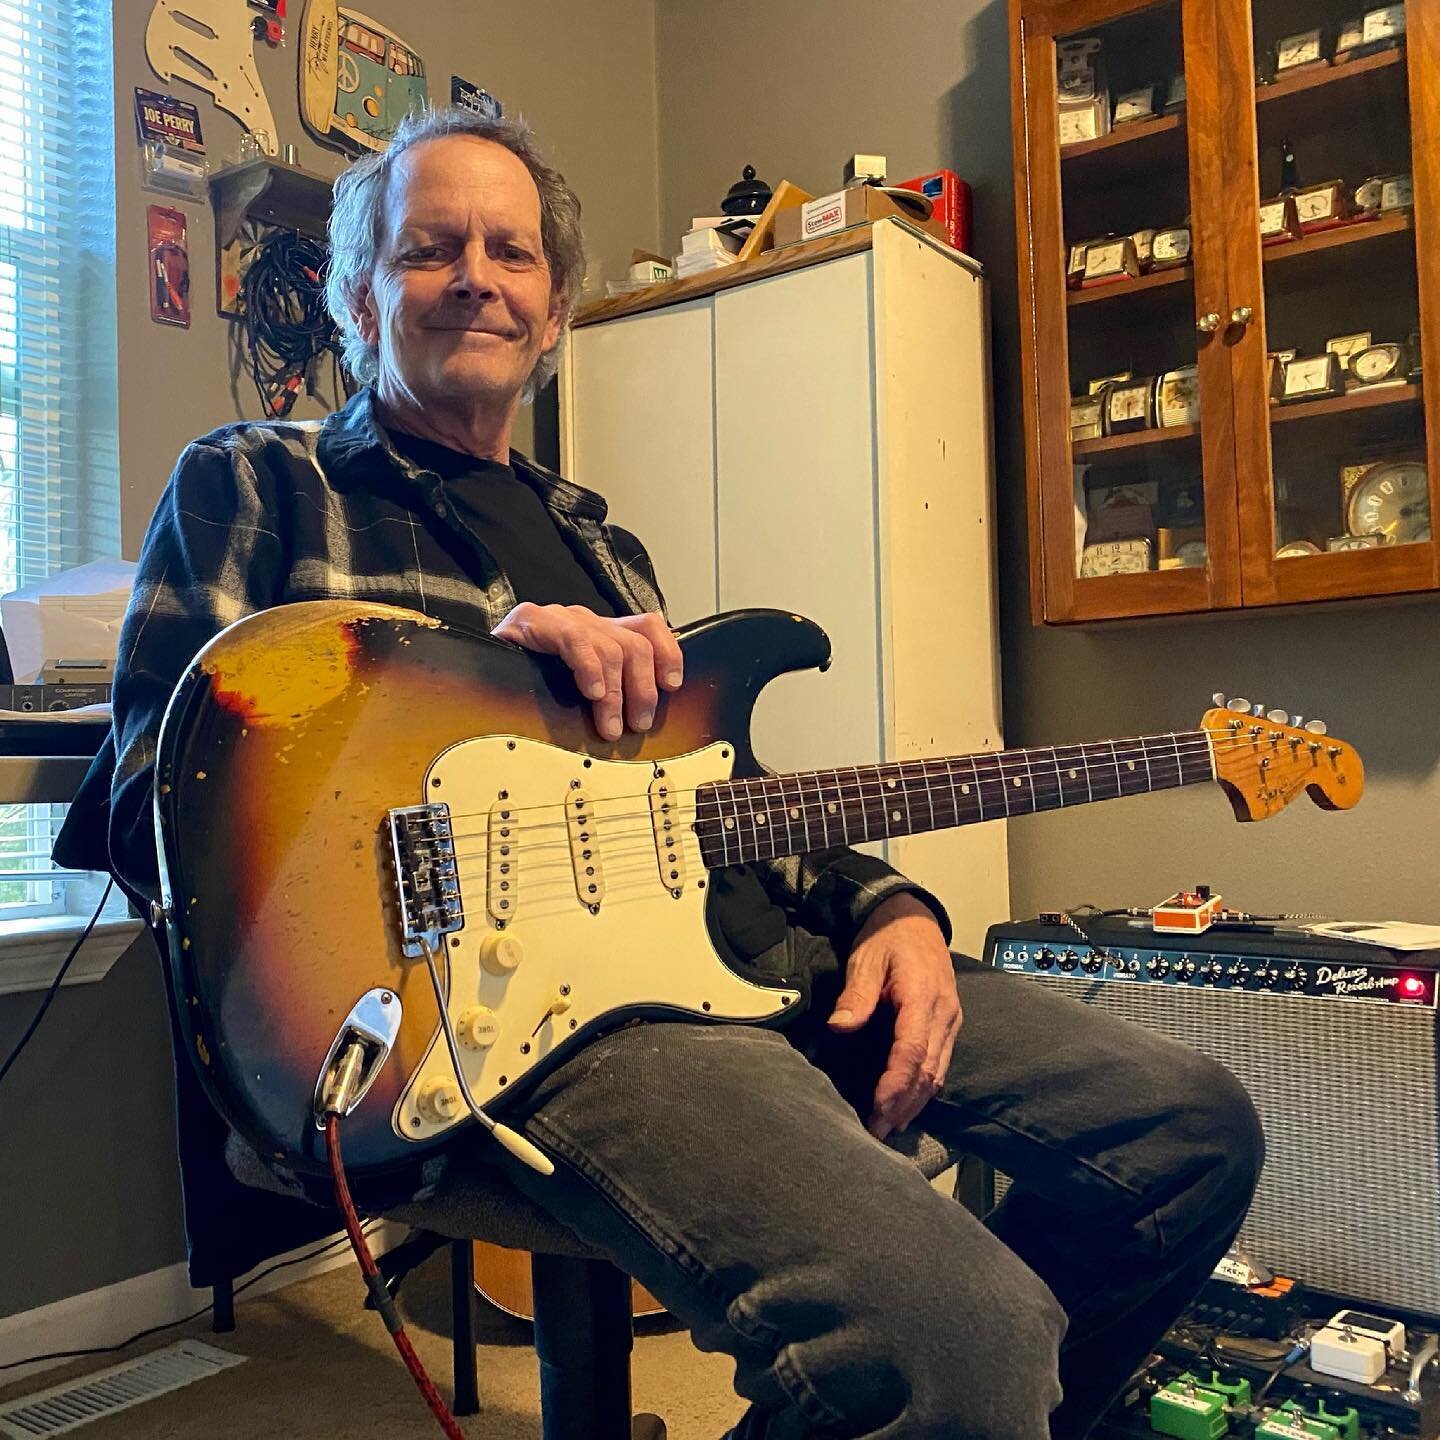 Pops Samsel giving the 66 Strat the stamp of approval. #welcometothetonezone